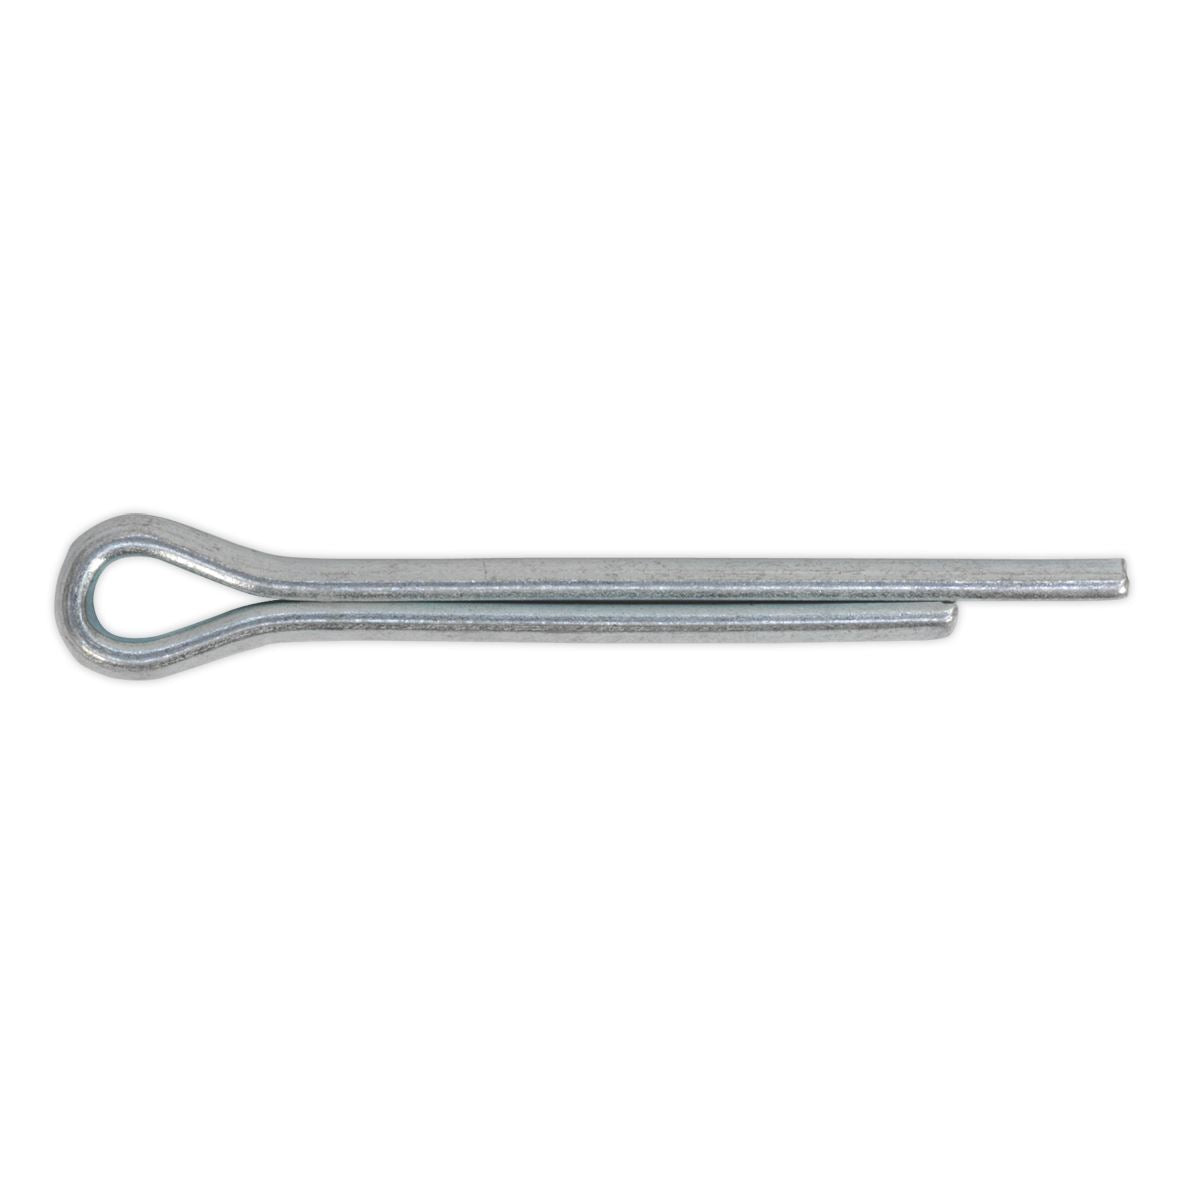 Sealey Split Pin 3.6 x 38mm Pack of 100